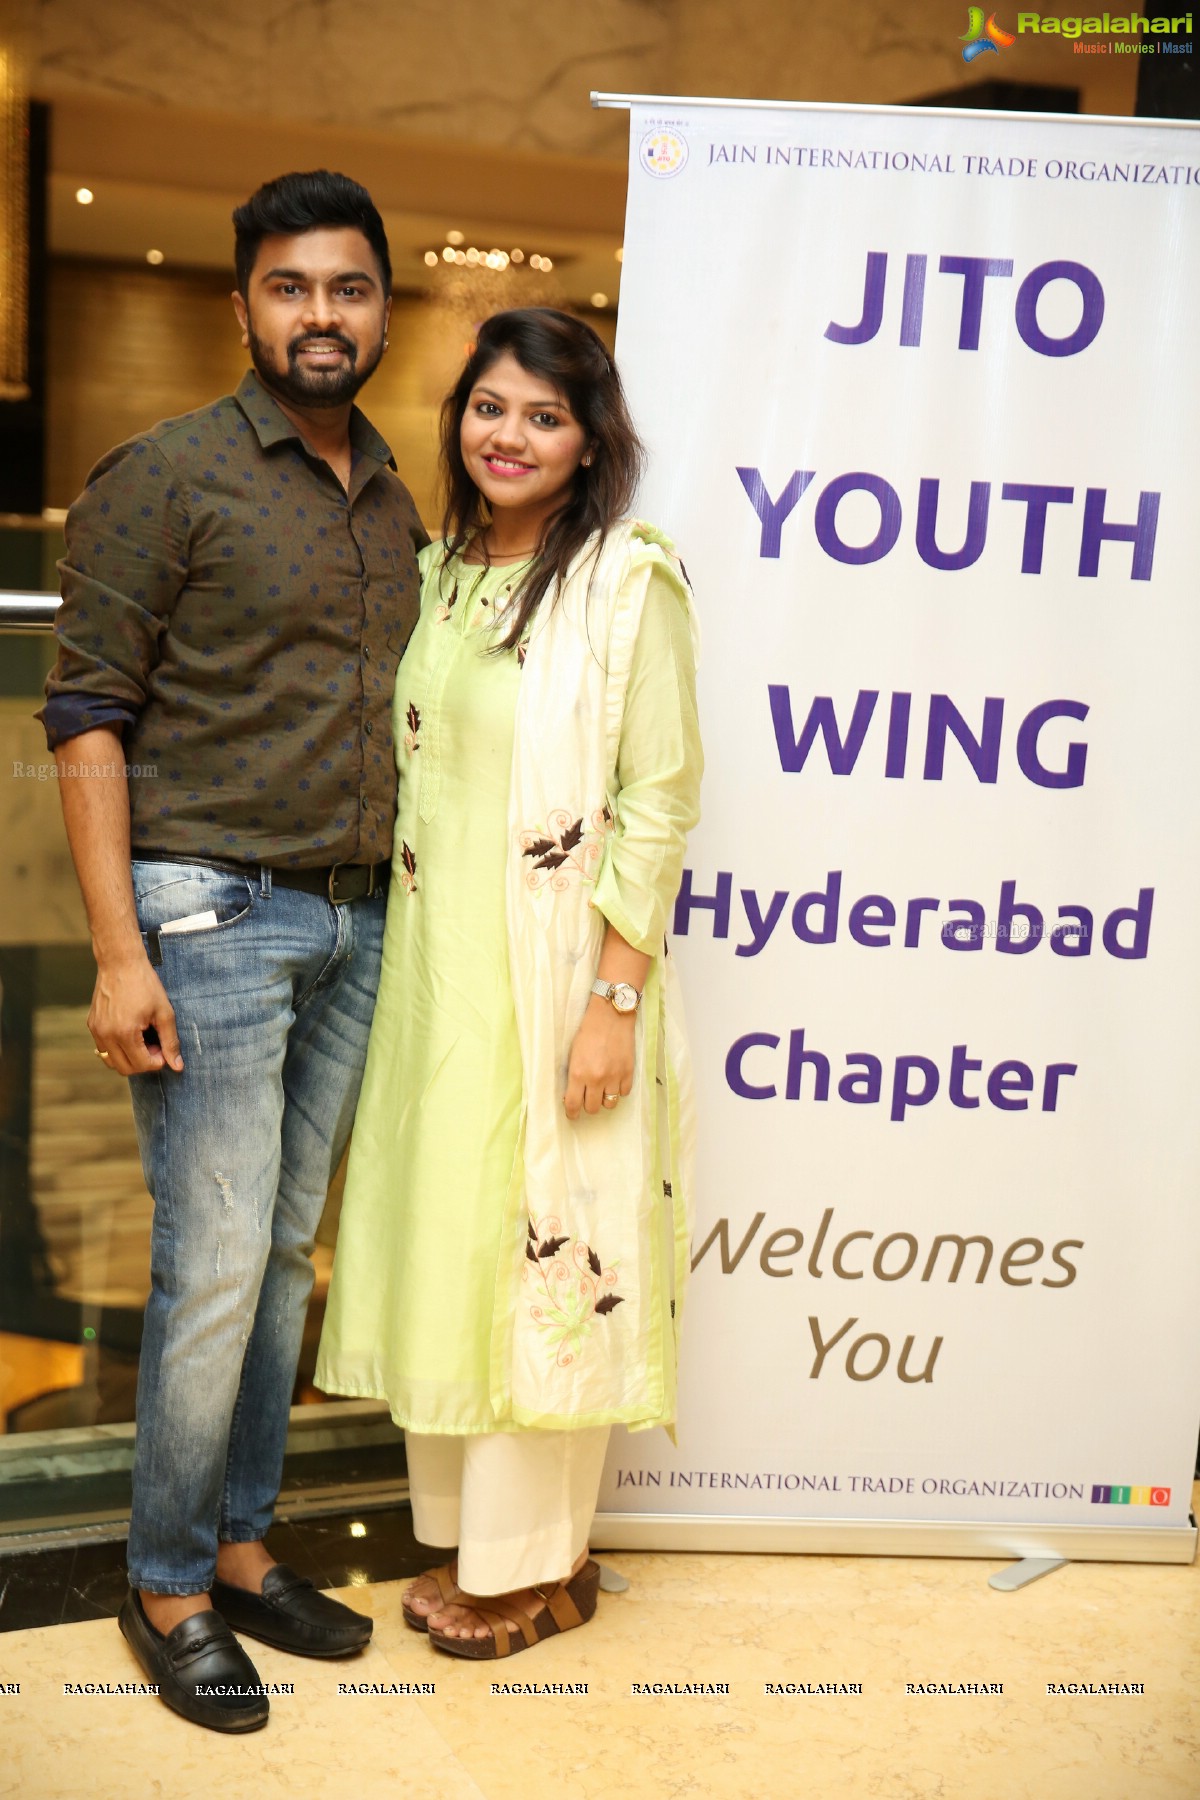 JITO Hyderabad Youth Wing Speaker Session